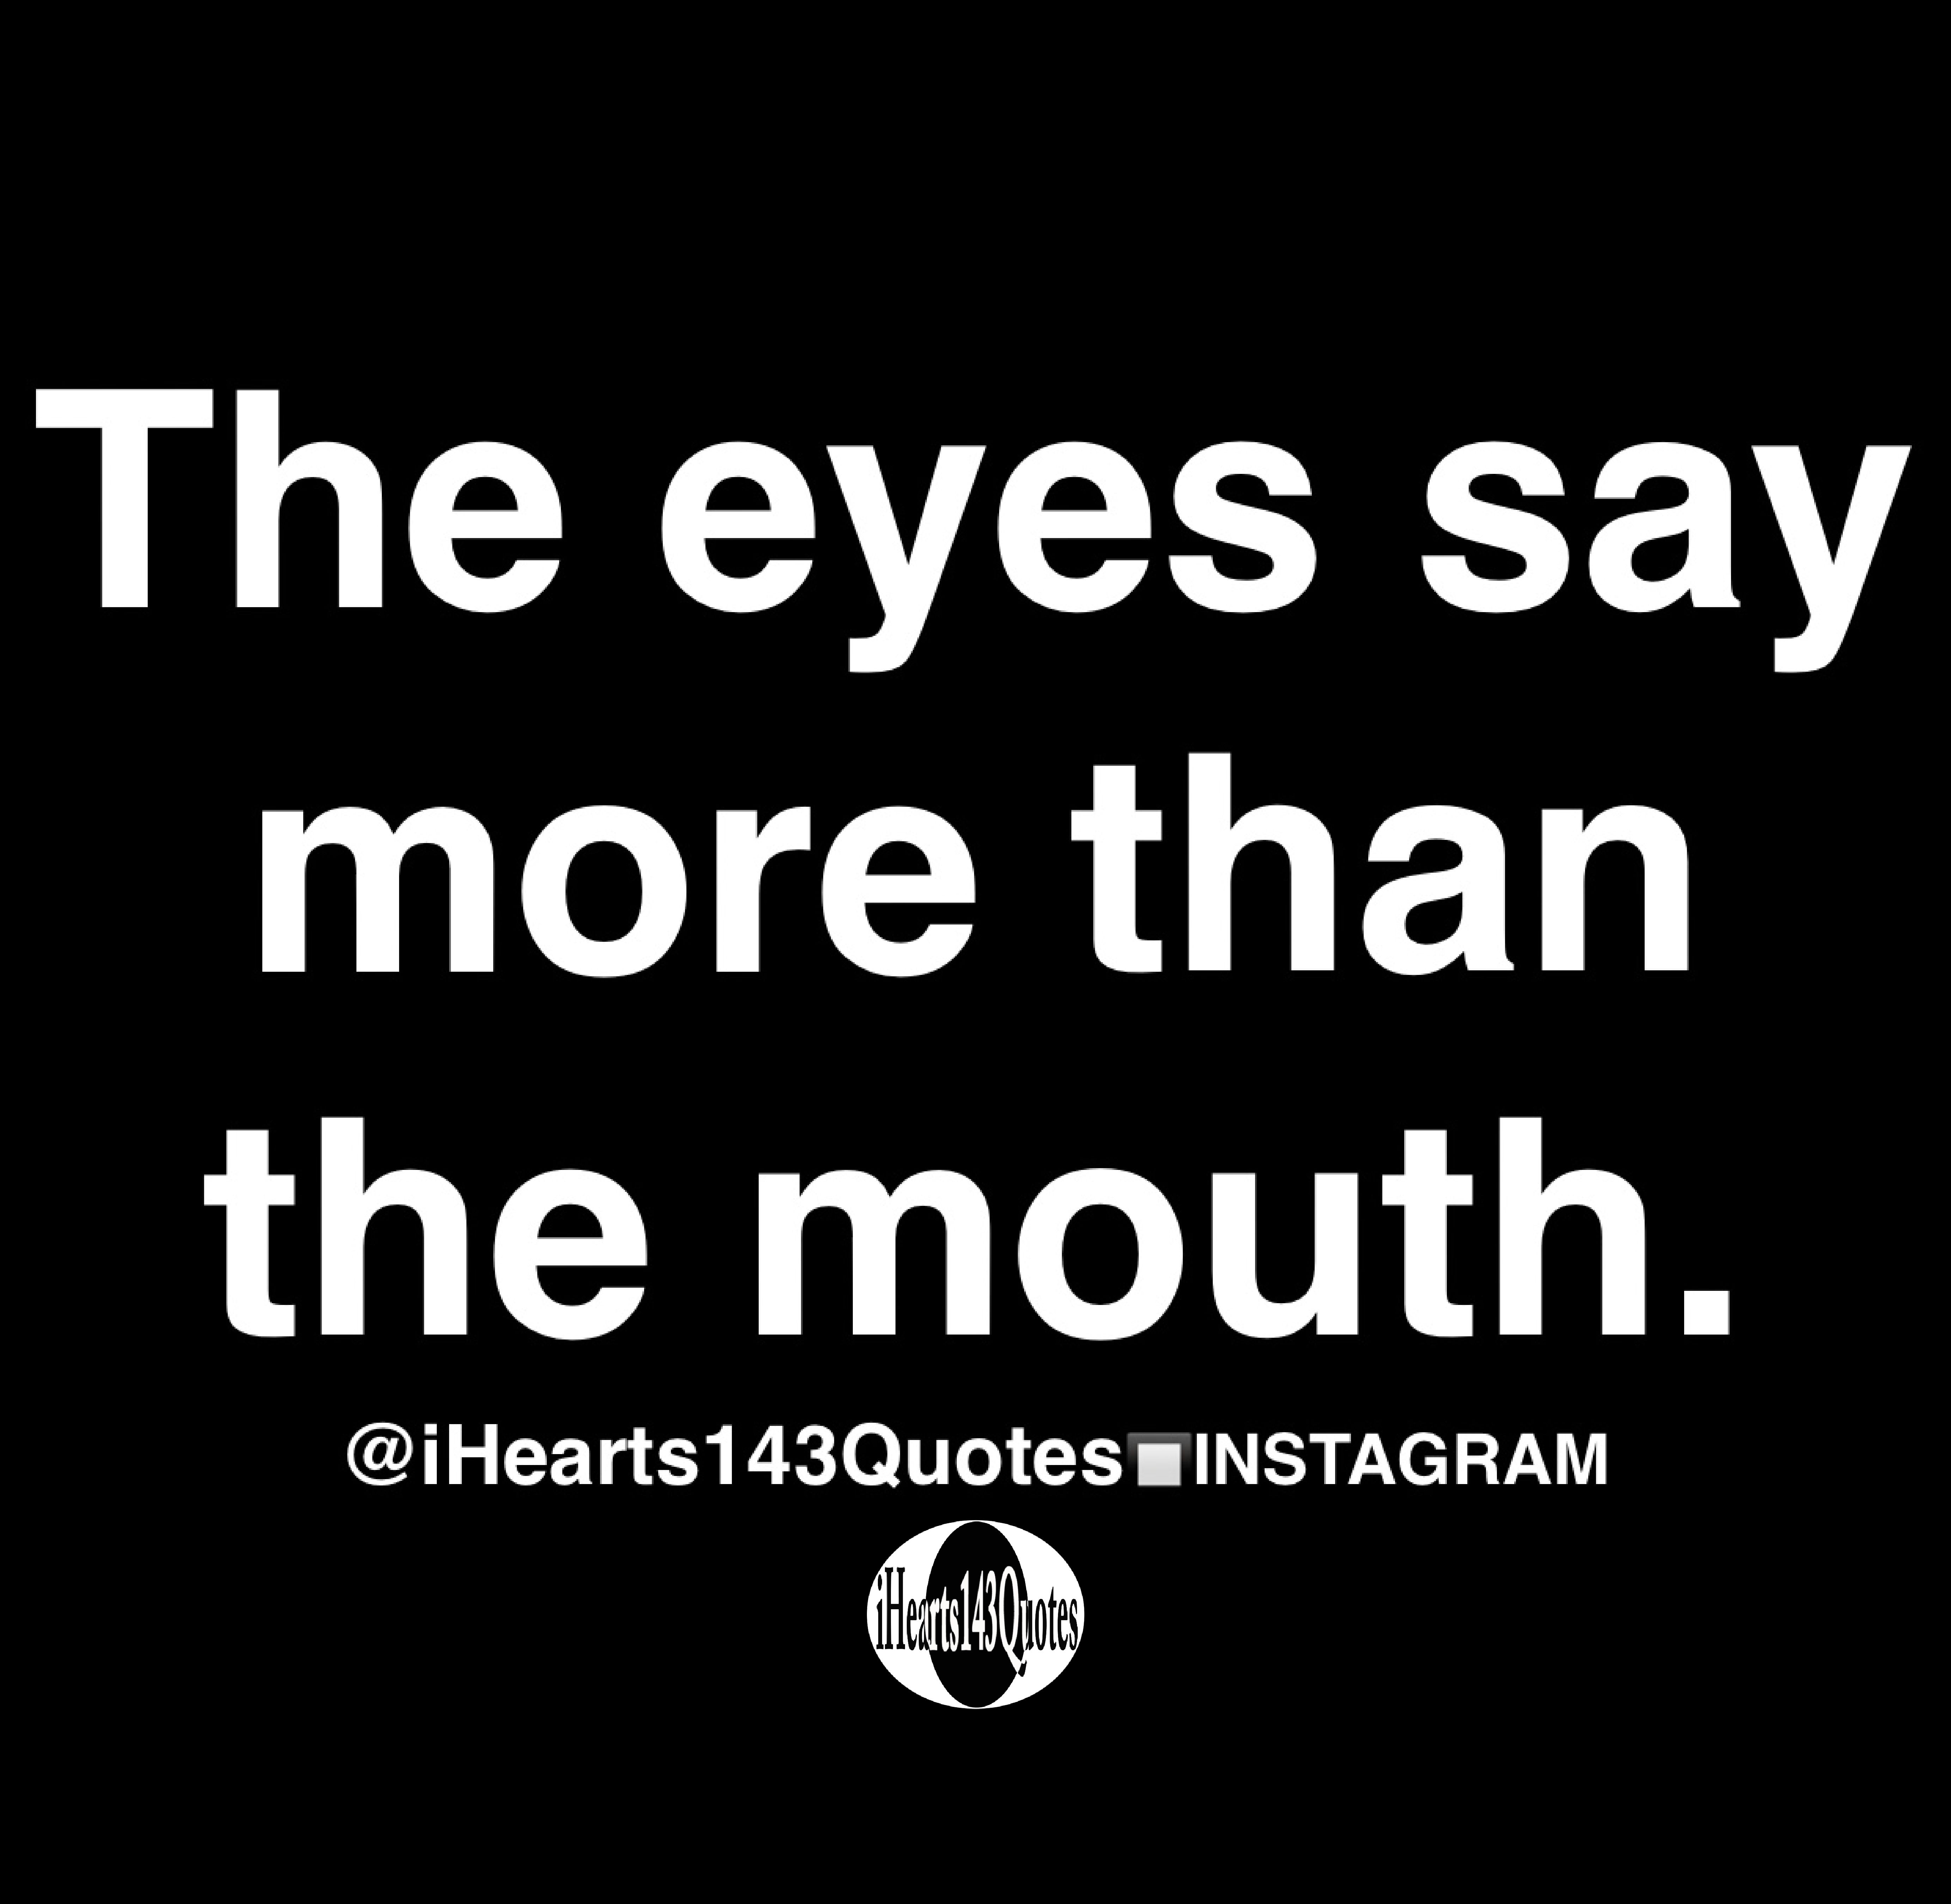 The eyes say more than the mouth - Quotes - iHearts143Quotes